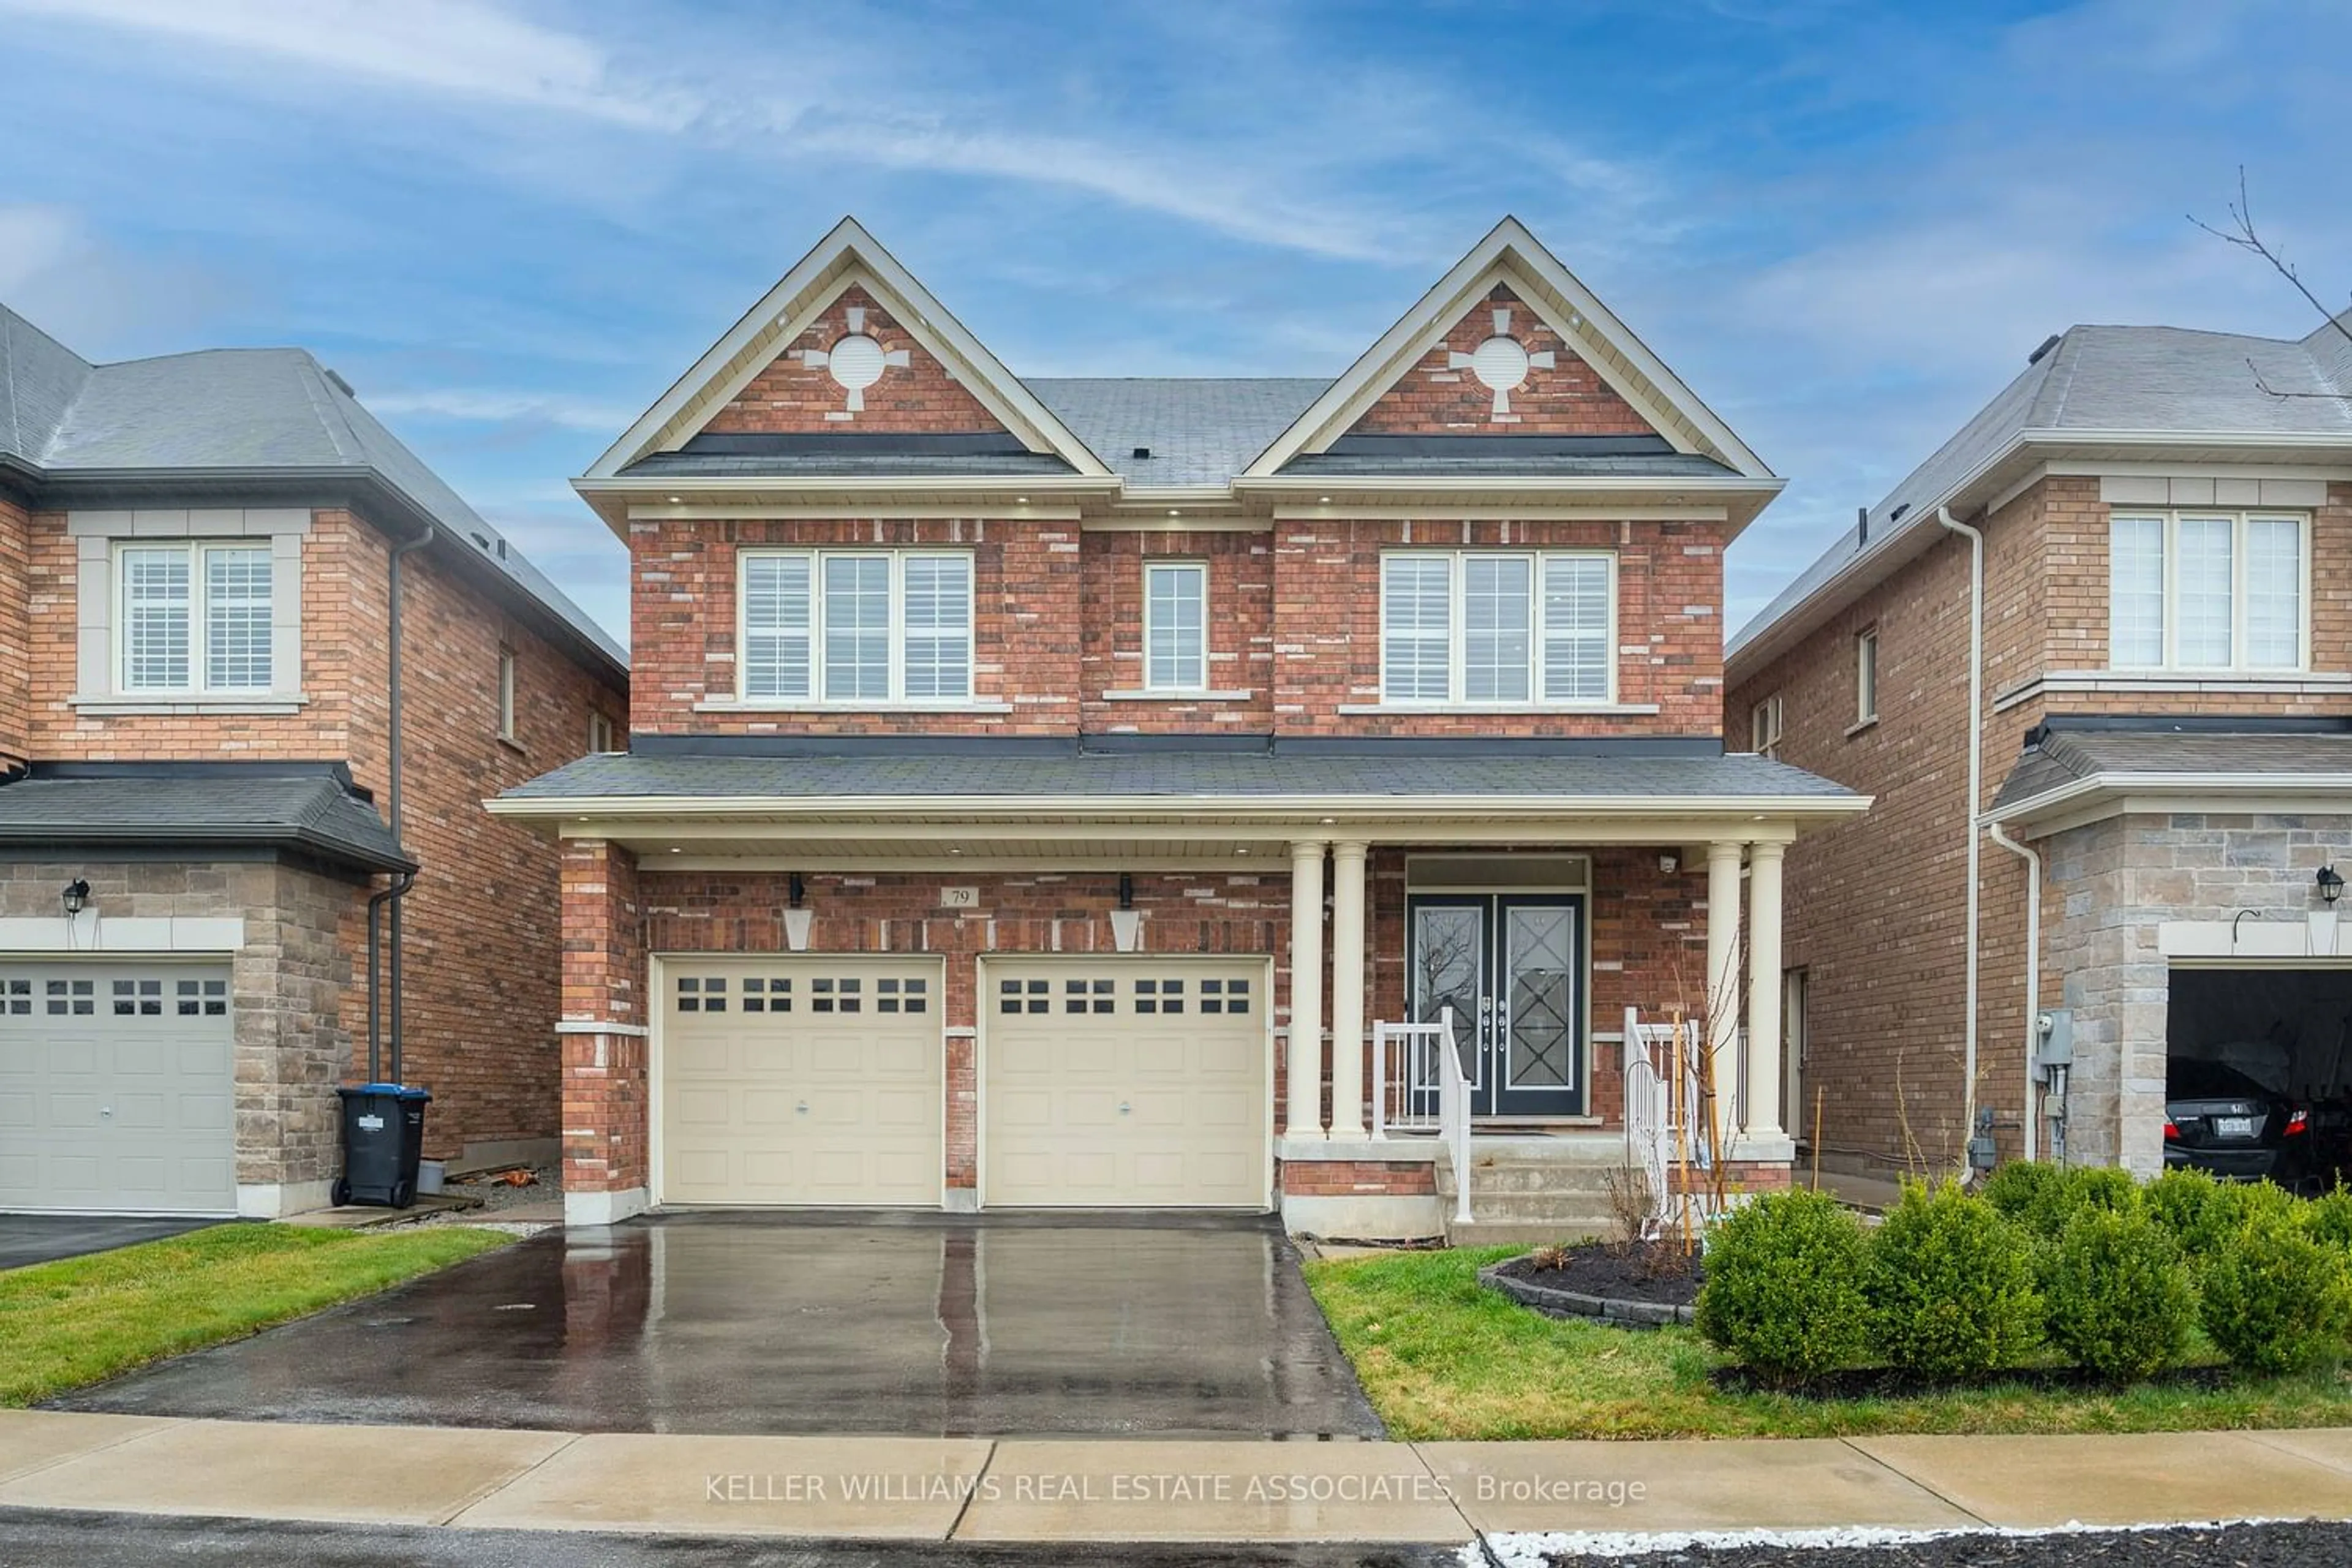 Home with brick exterior material for 79 Valleyway Dr, Brampton Ontario L6X 3C4